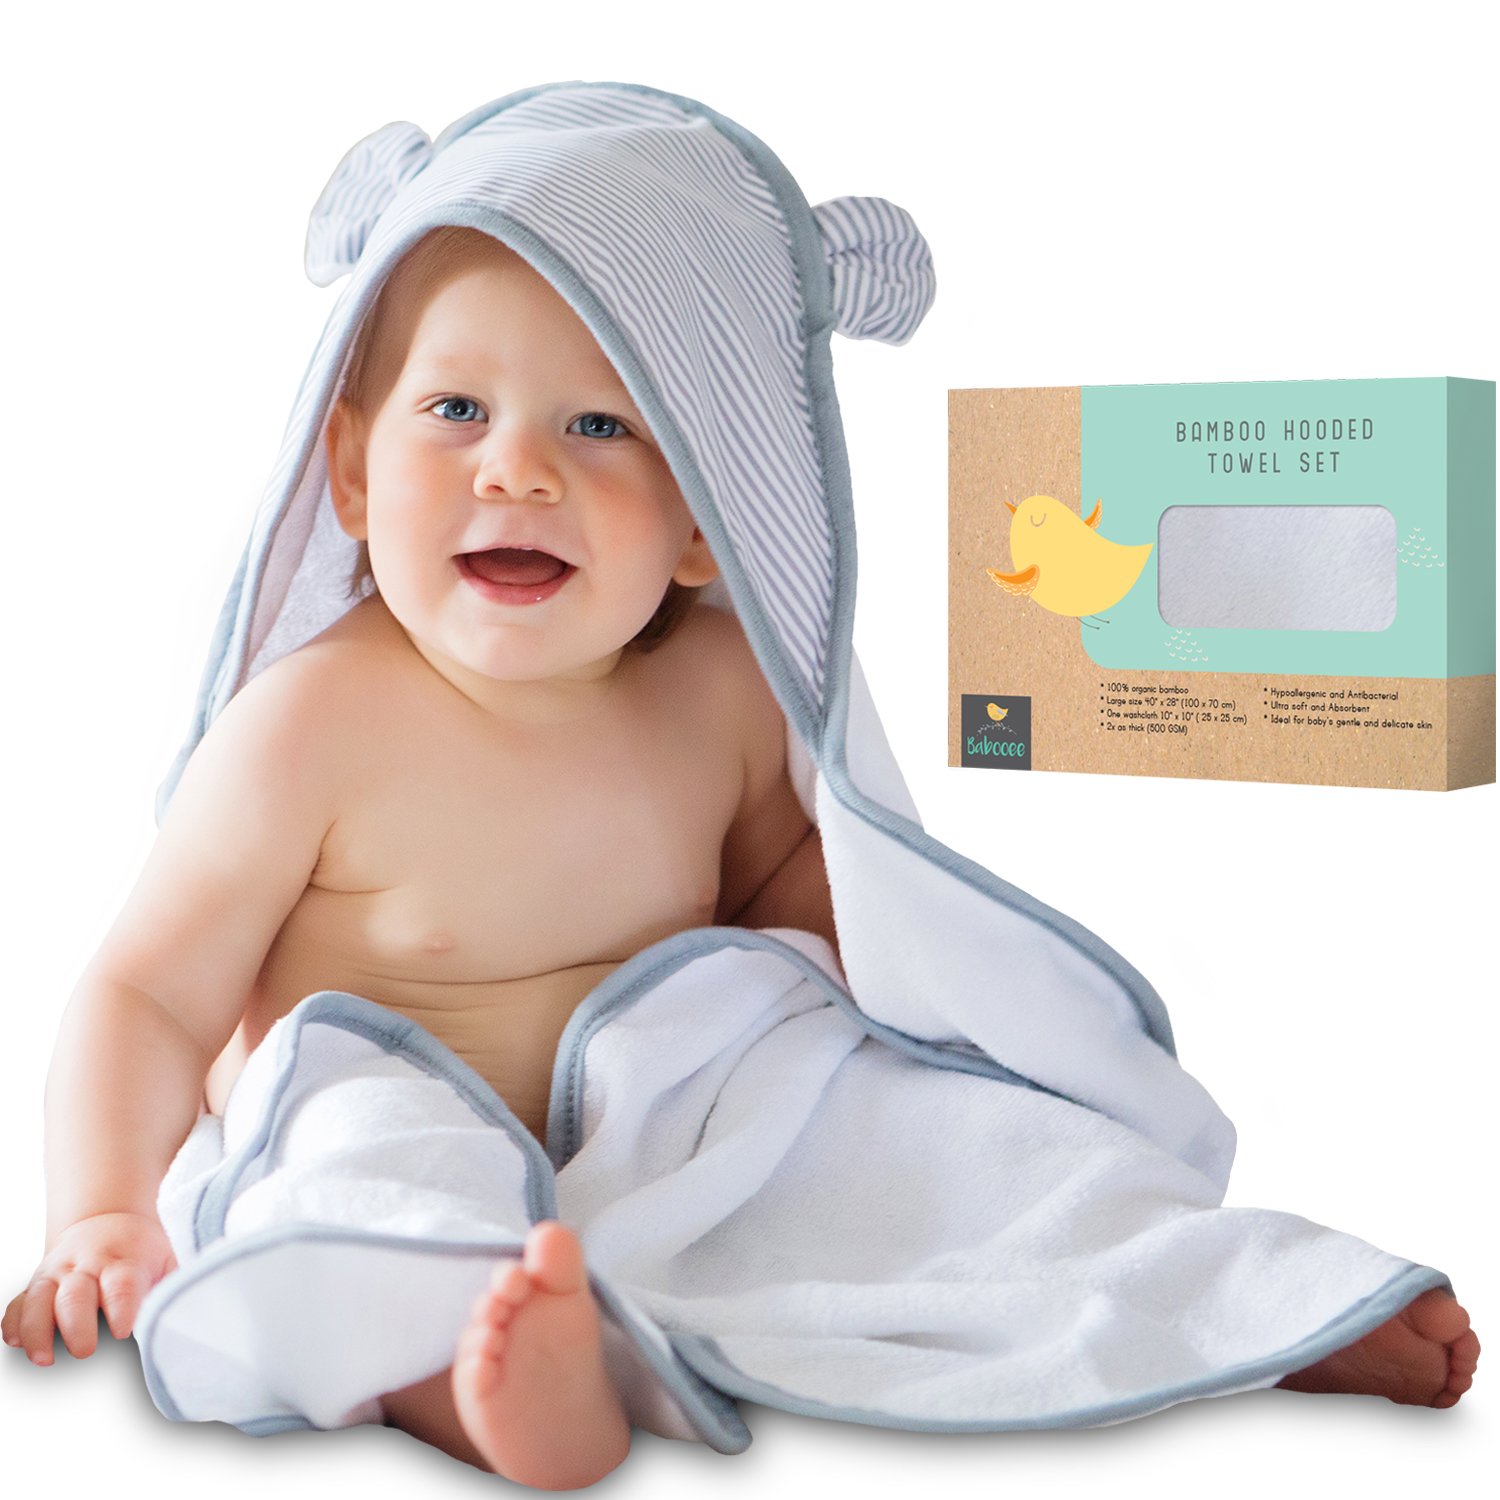 Buying top quality hooded towels for babies